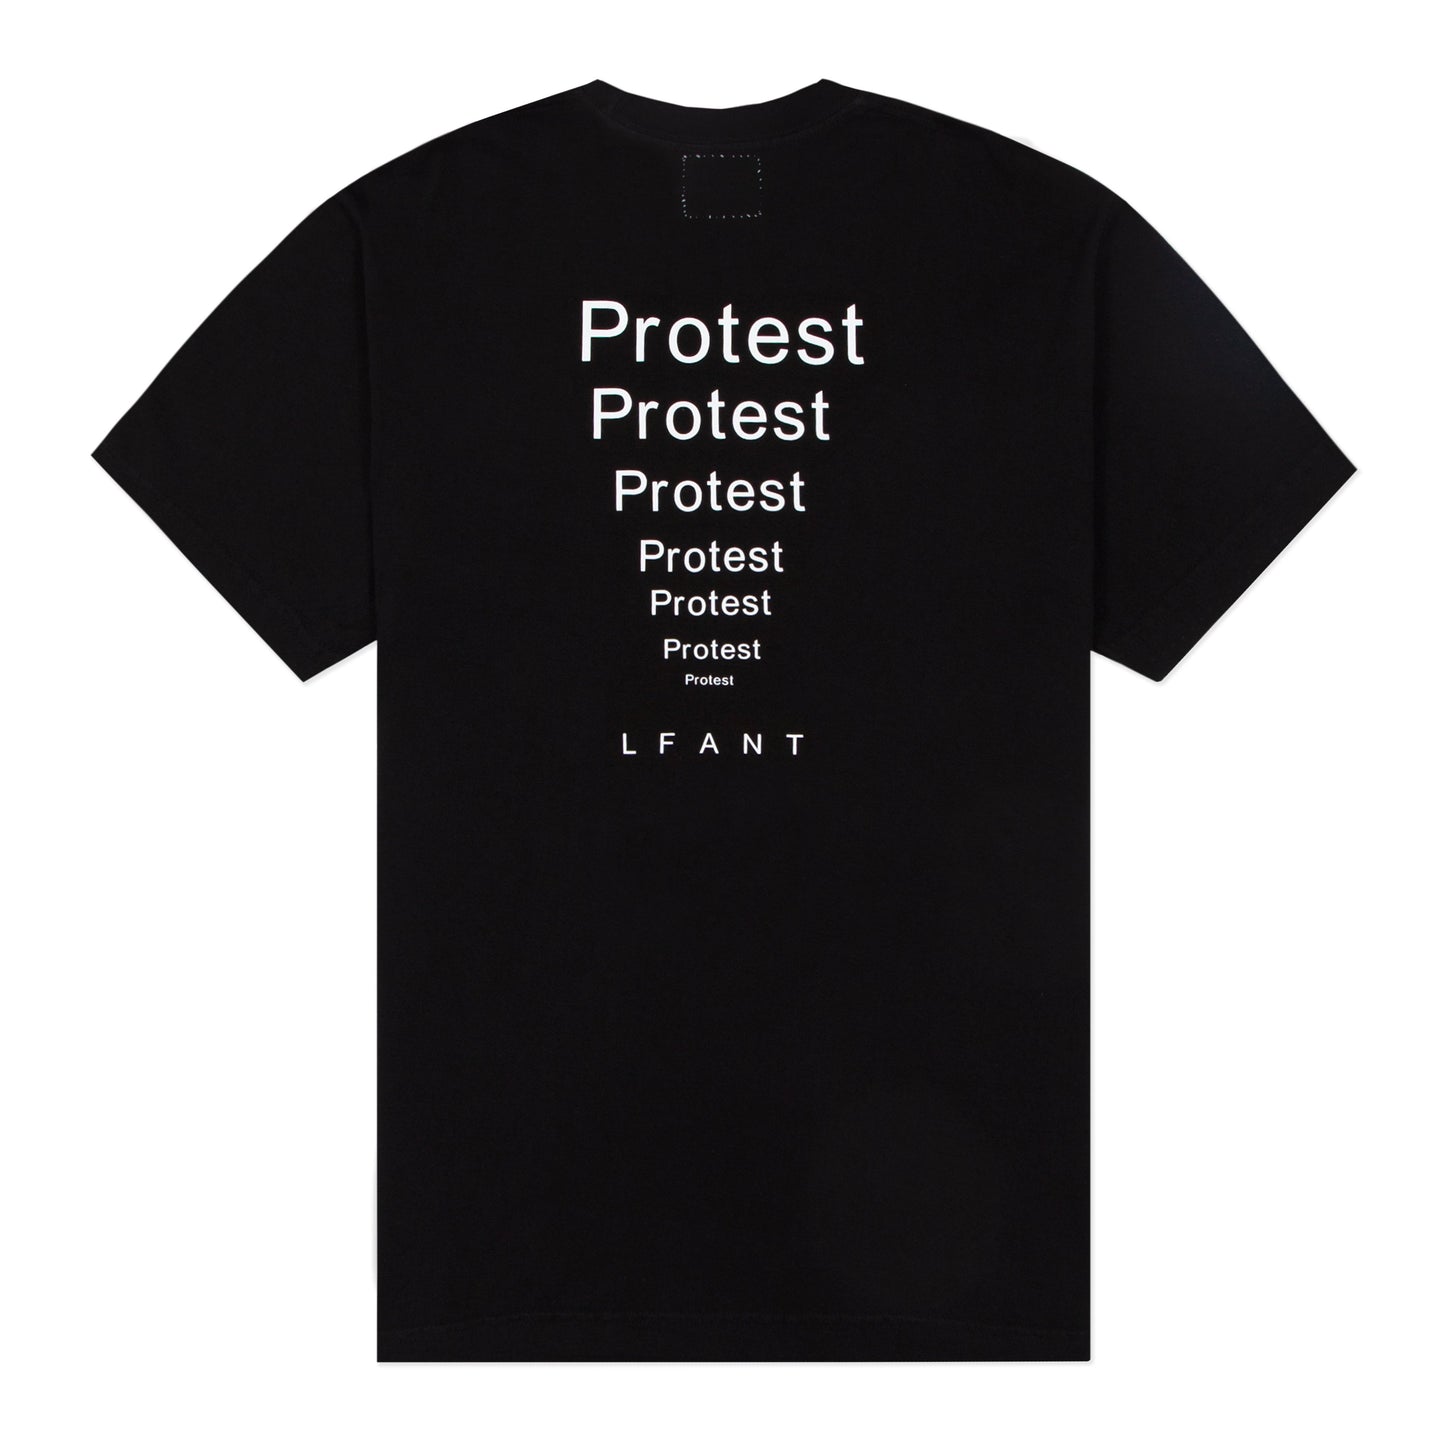 Black t-shirt with "Protest" repeatedly printed down the back.